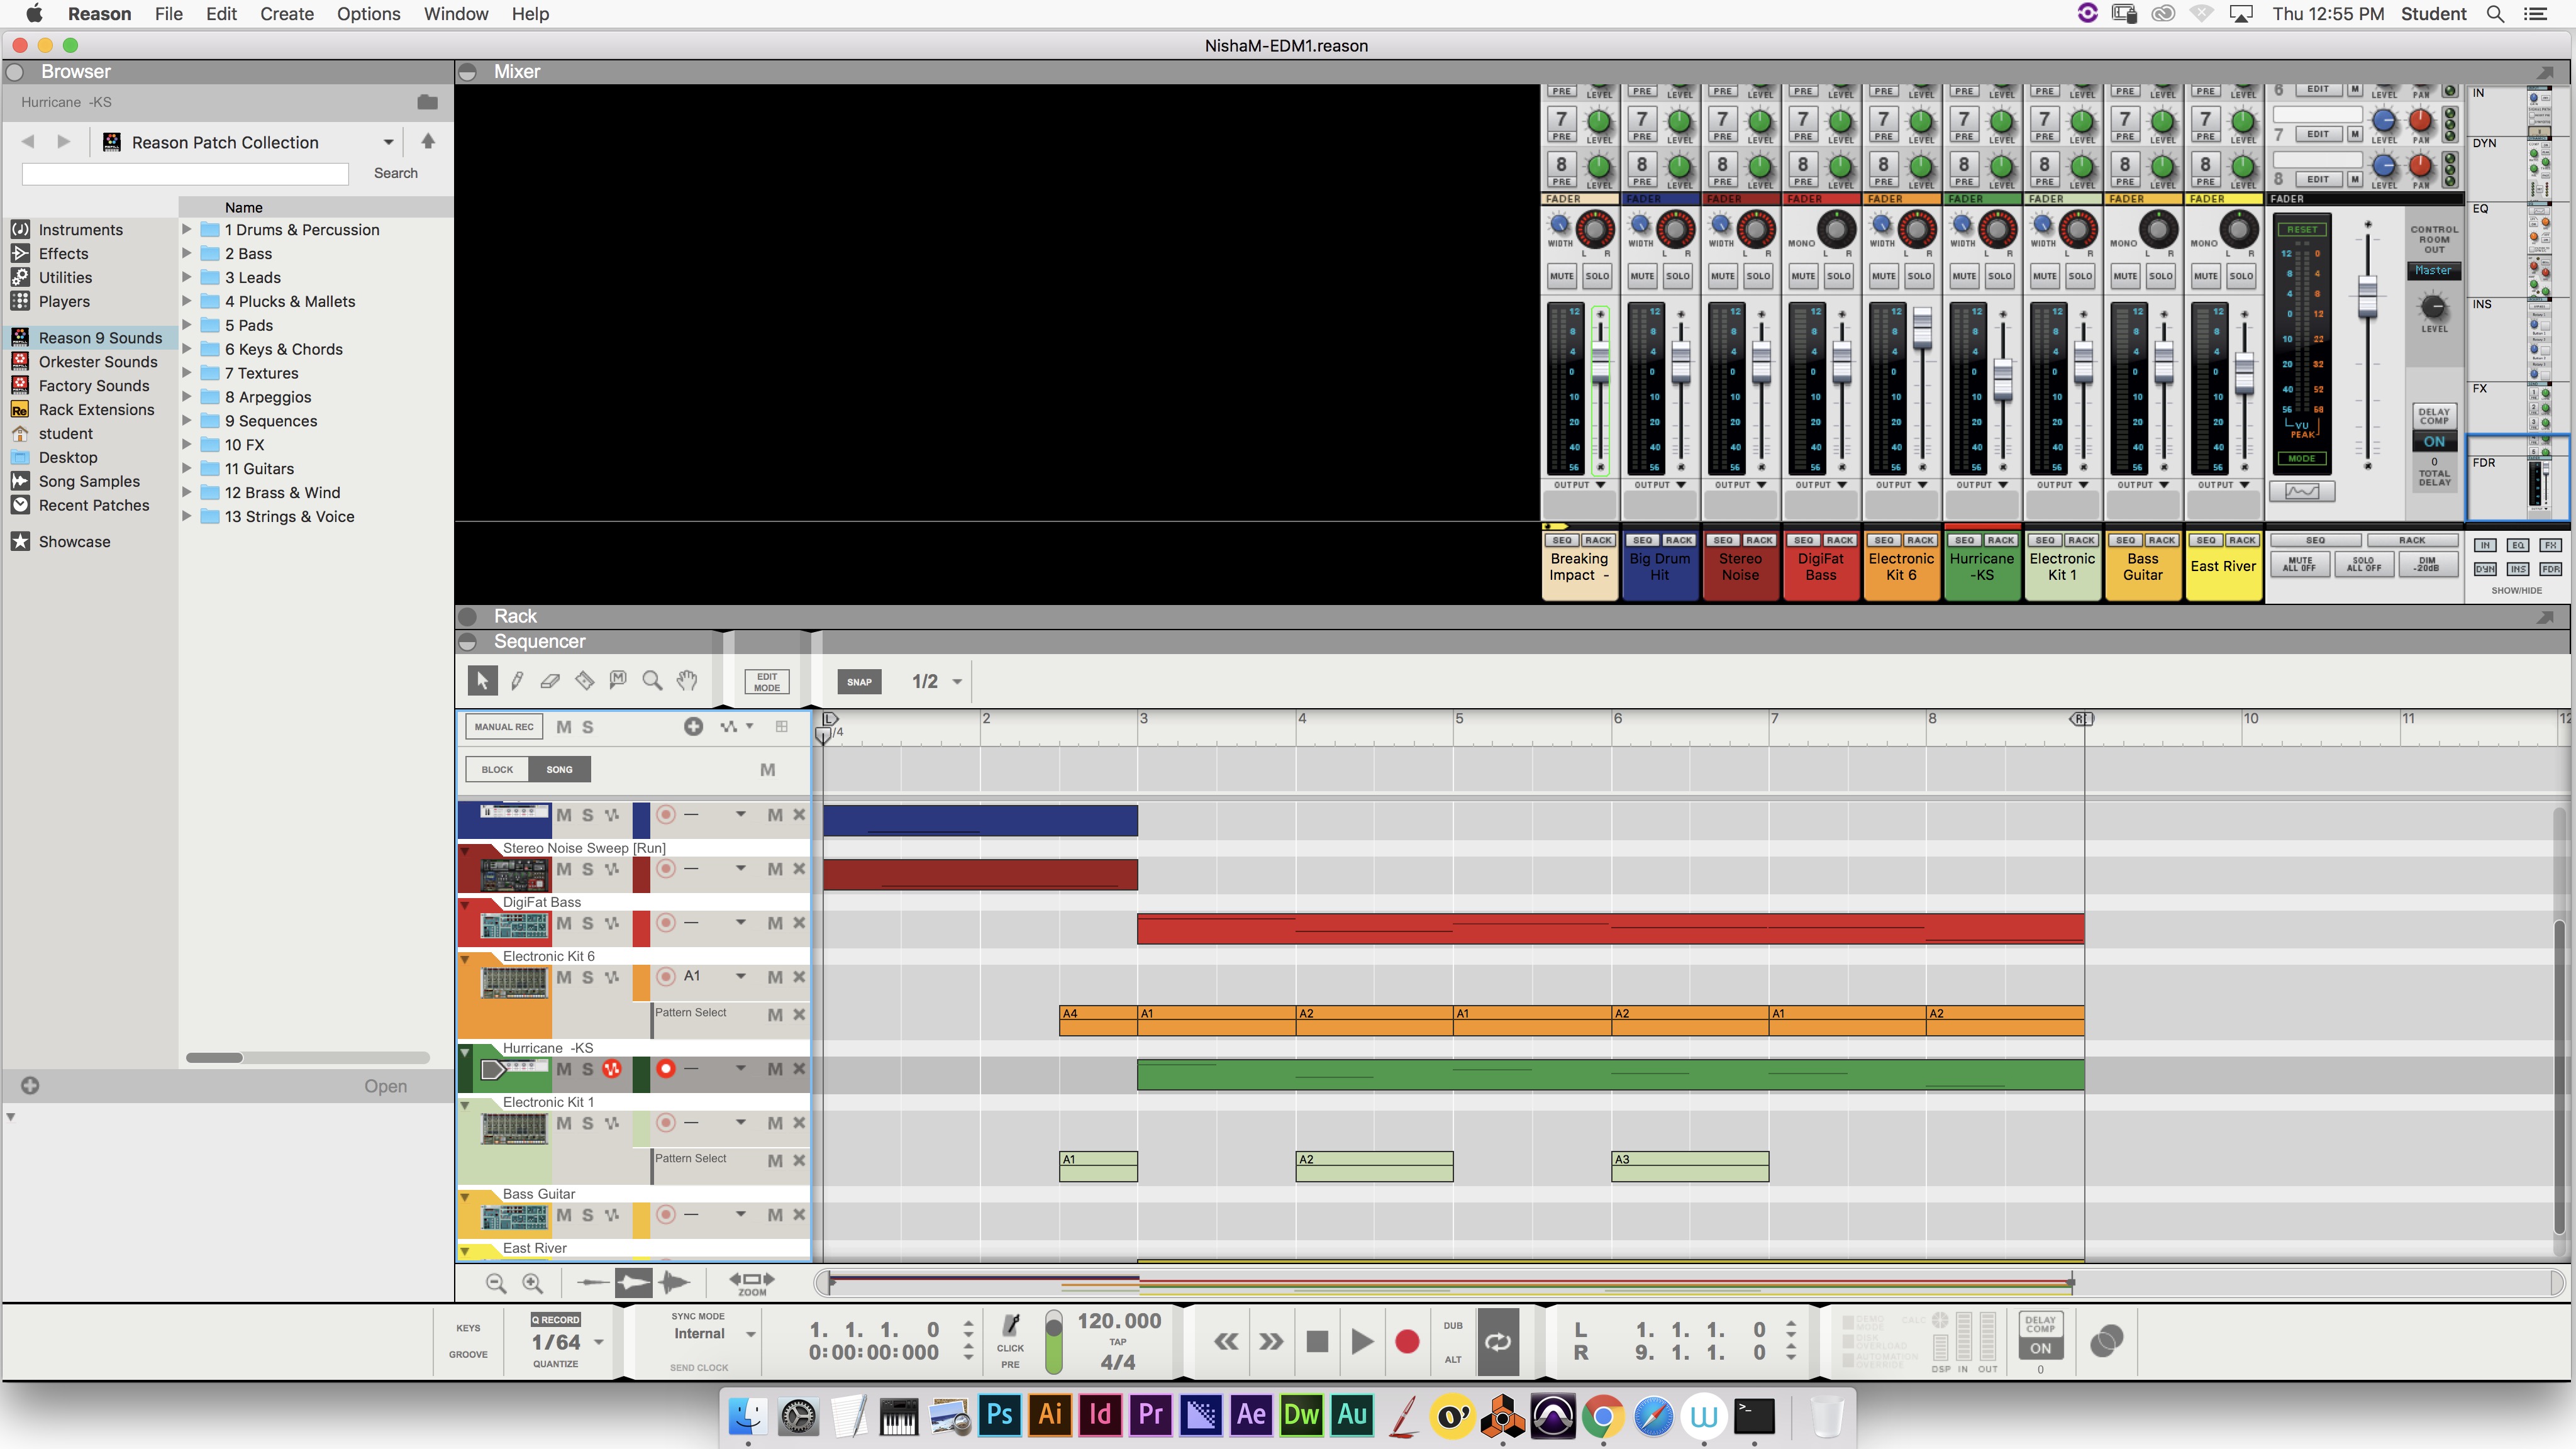 This is a screenshot of my Reason session for my EDM music.